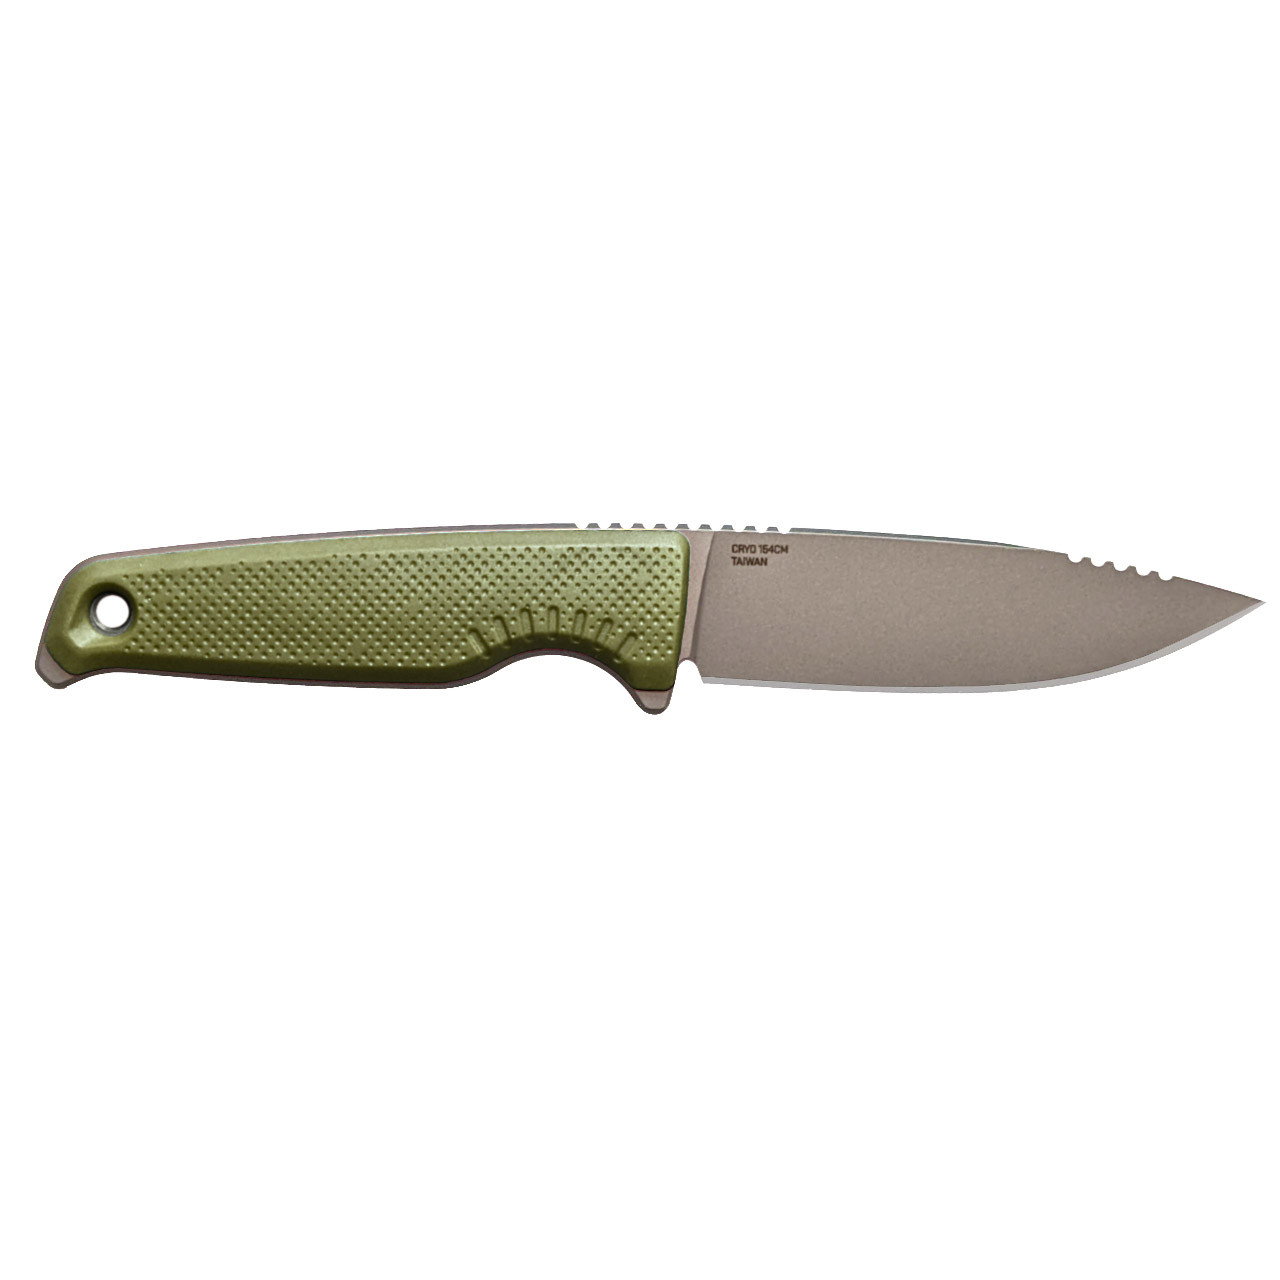 SOG Knives Altair FX 17-79-03-47 Fixed Blade CPM 154 Stainless Field Green Knife